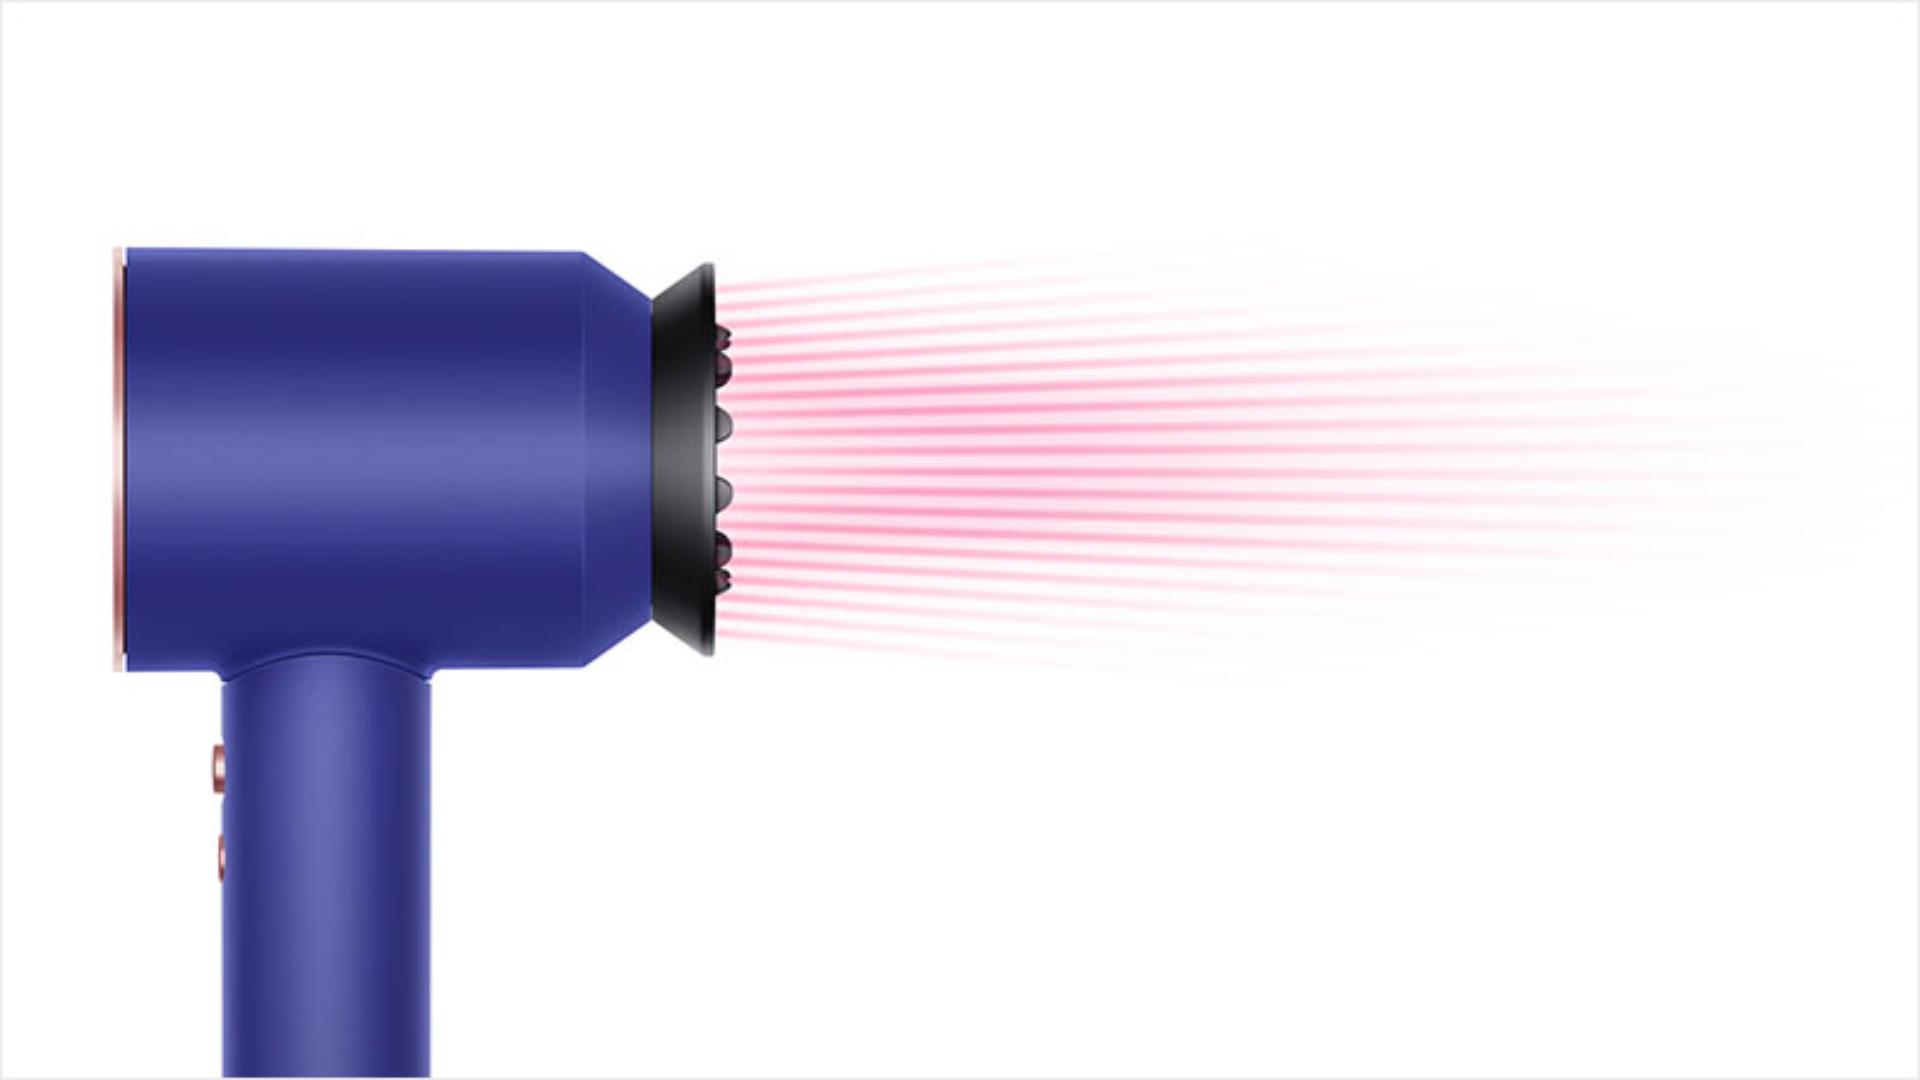 Side view of the Dyson Supersonic with Gentle air attachment.